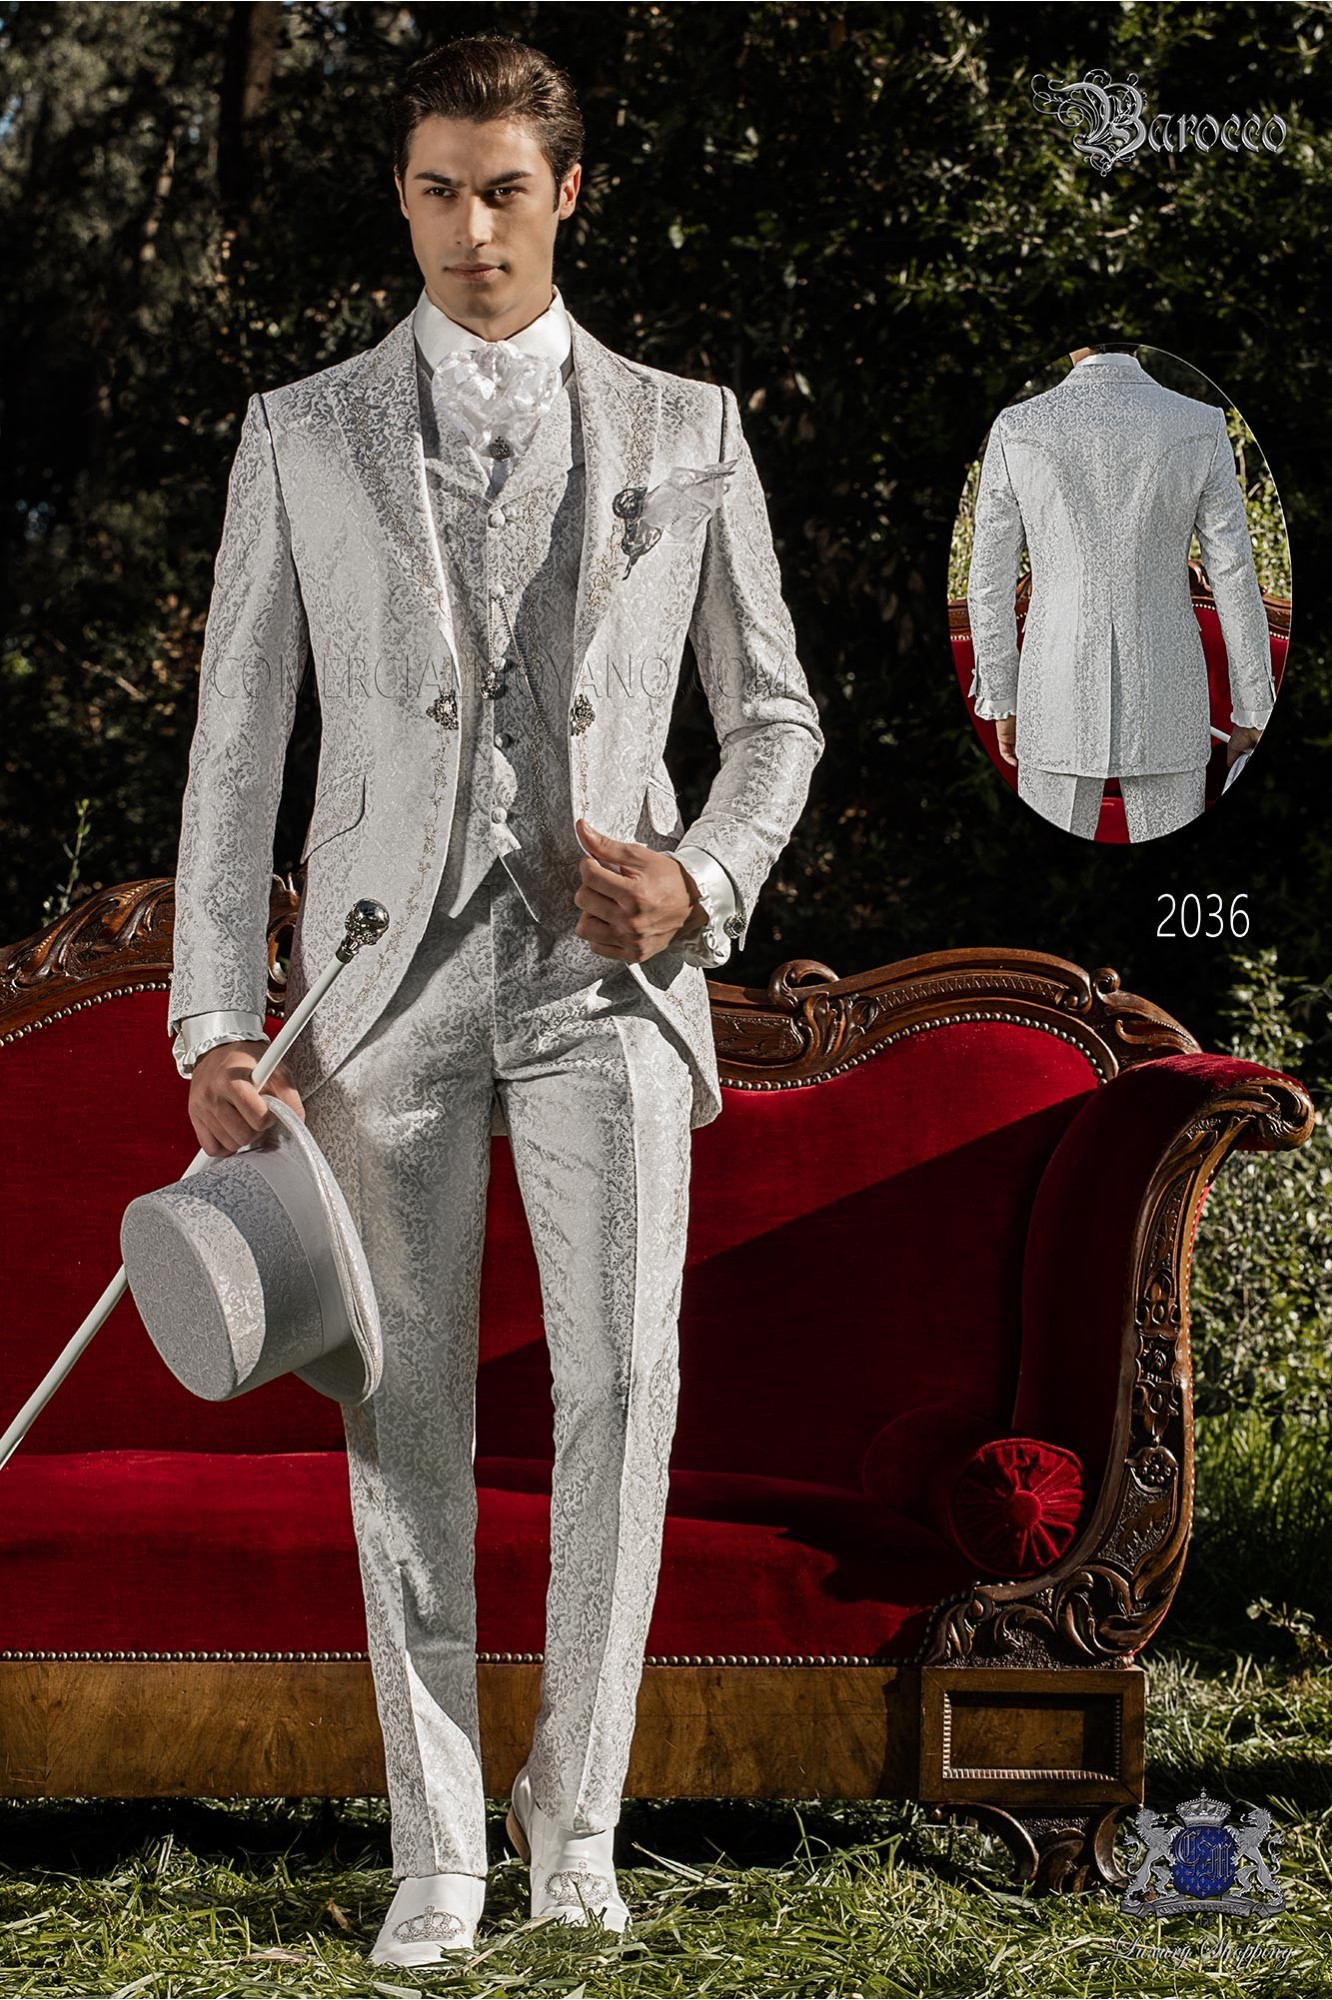 vintage frock coat in pearl gray jacquard fabric with silver embroidery and crystal clasp model 2036 Mario Moyano